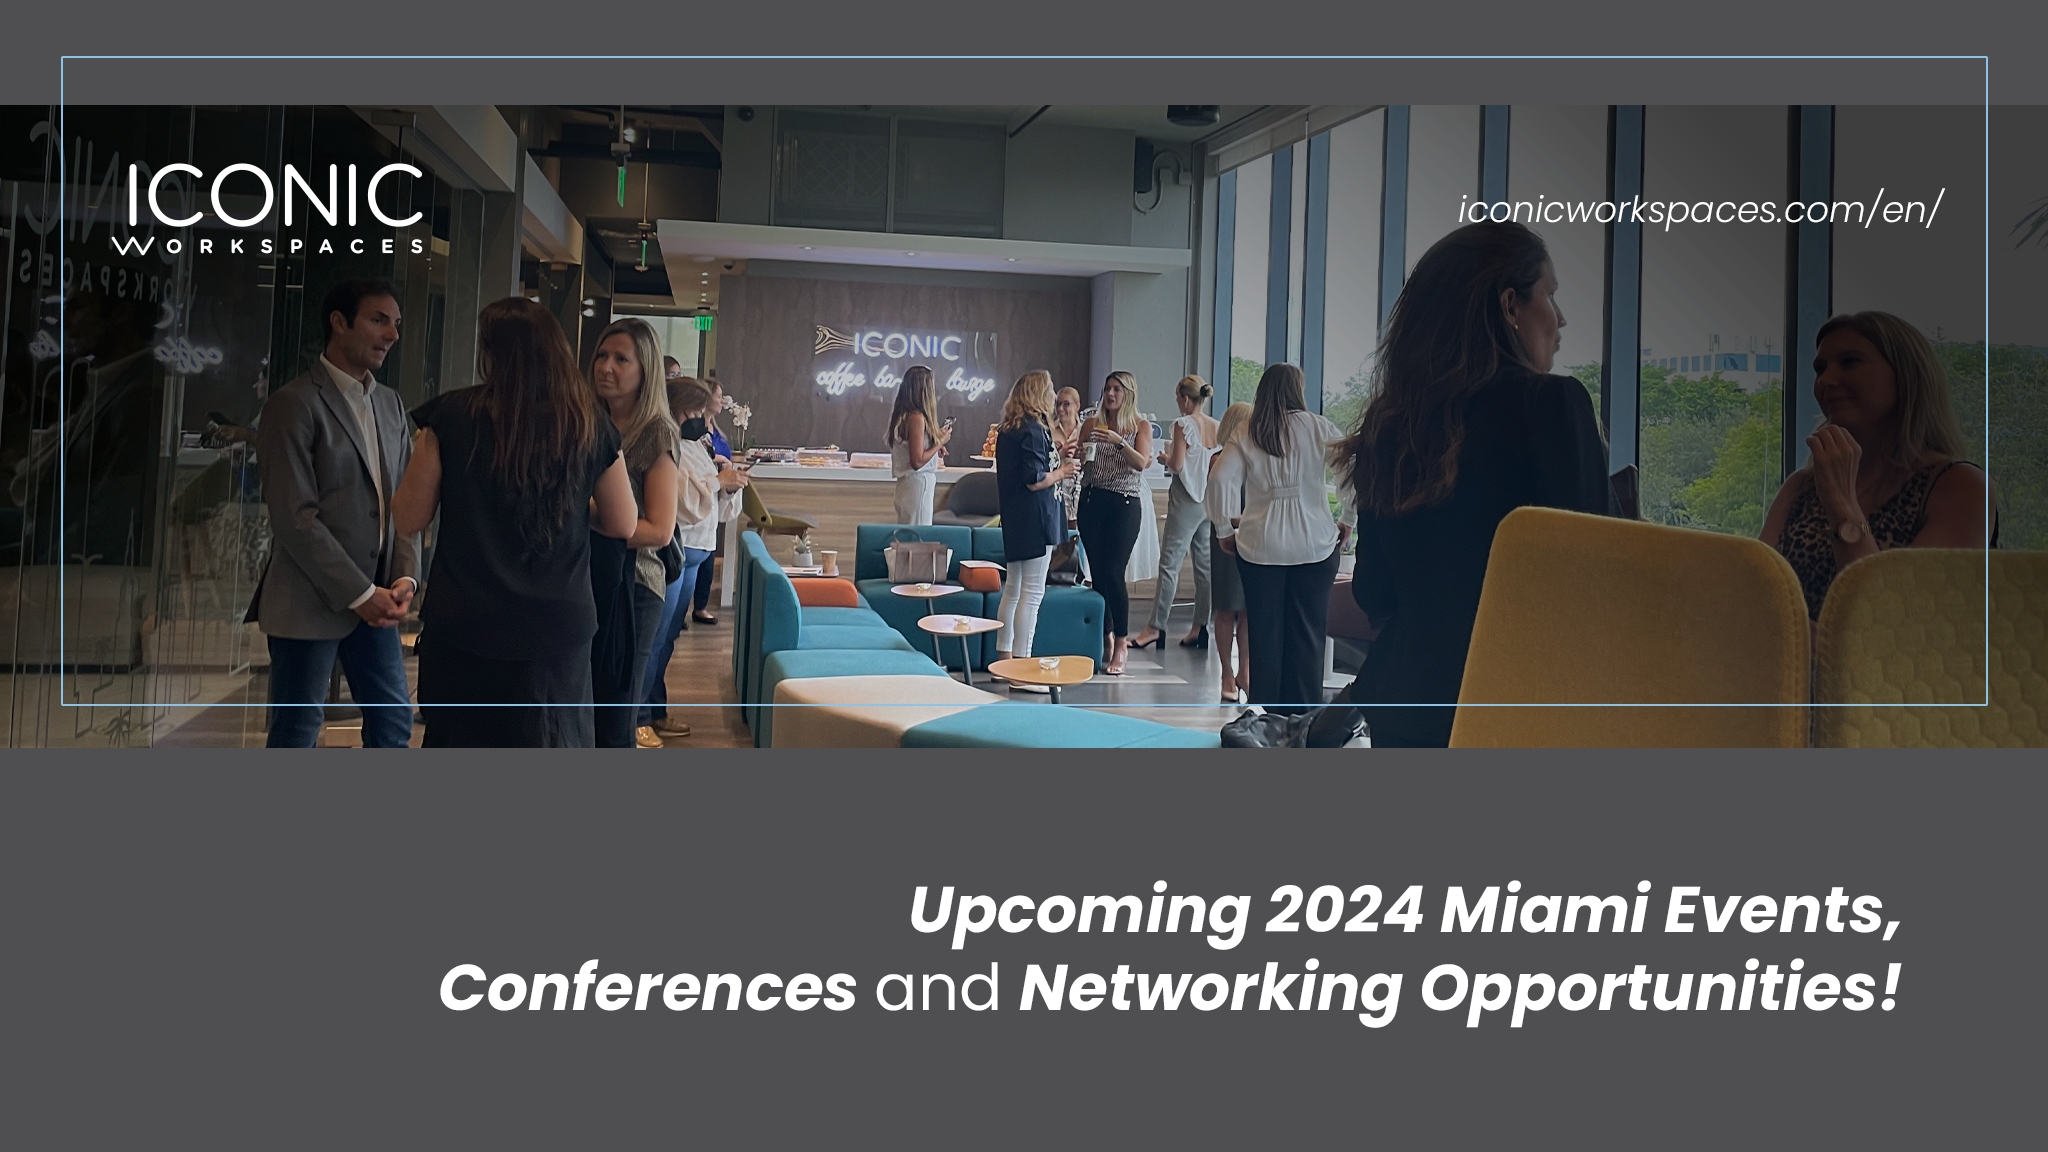 Upcoming 2024 Miami Events, Conferences, and Networking Opportunities